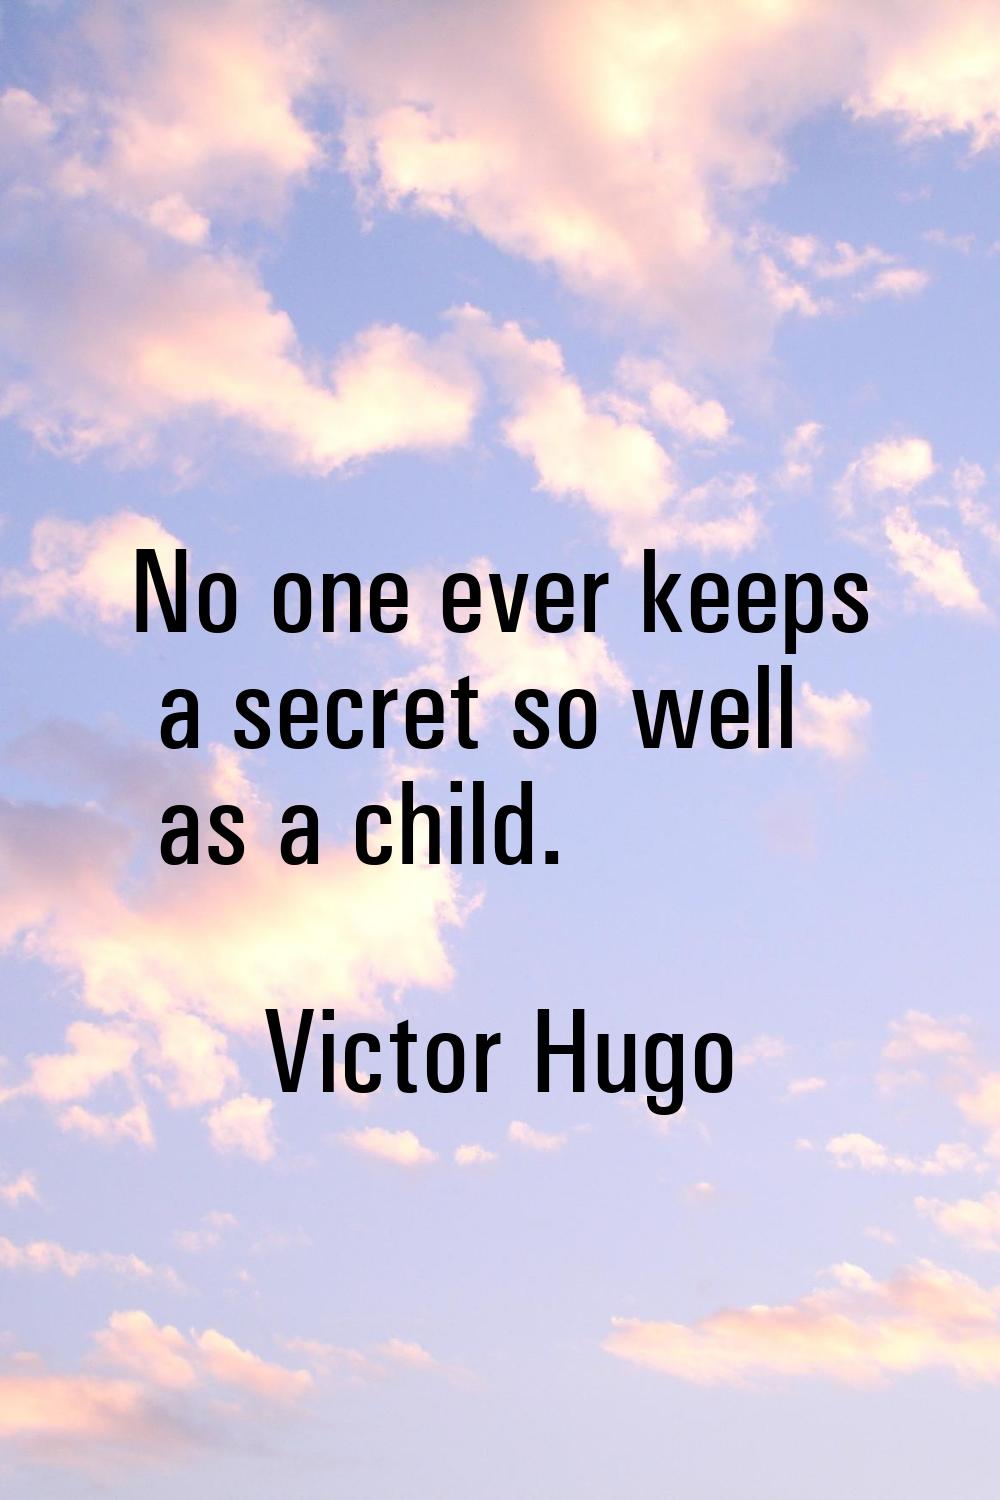 No one ever keeps a secret so well as a child.